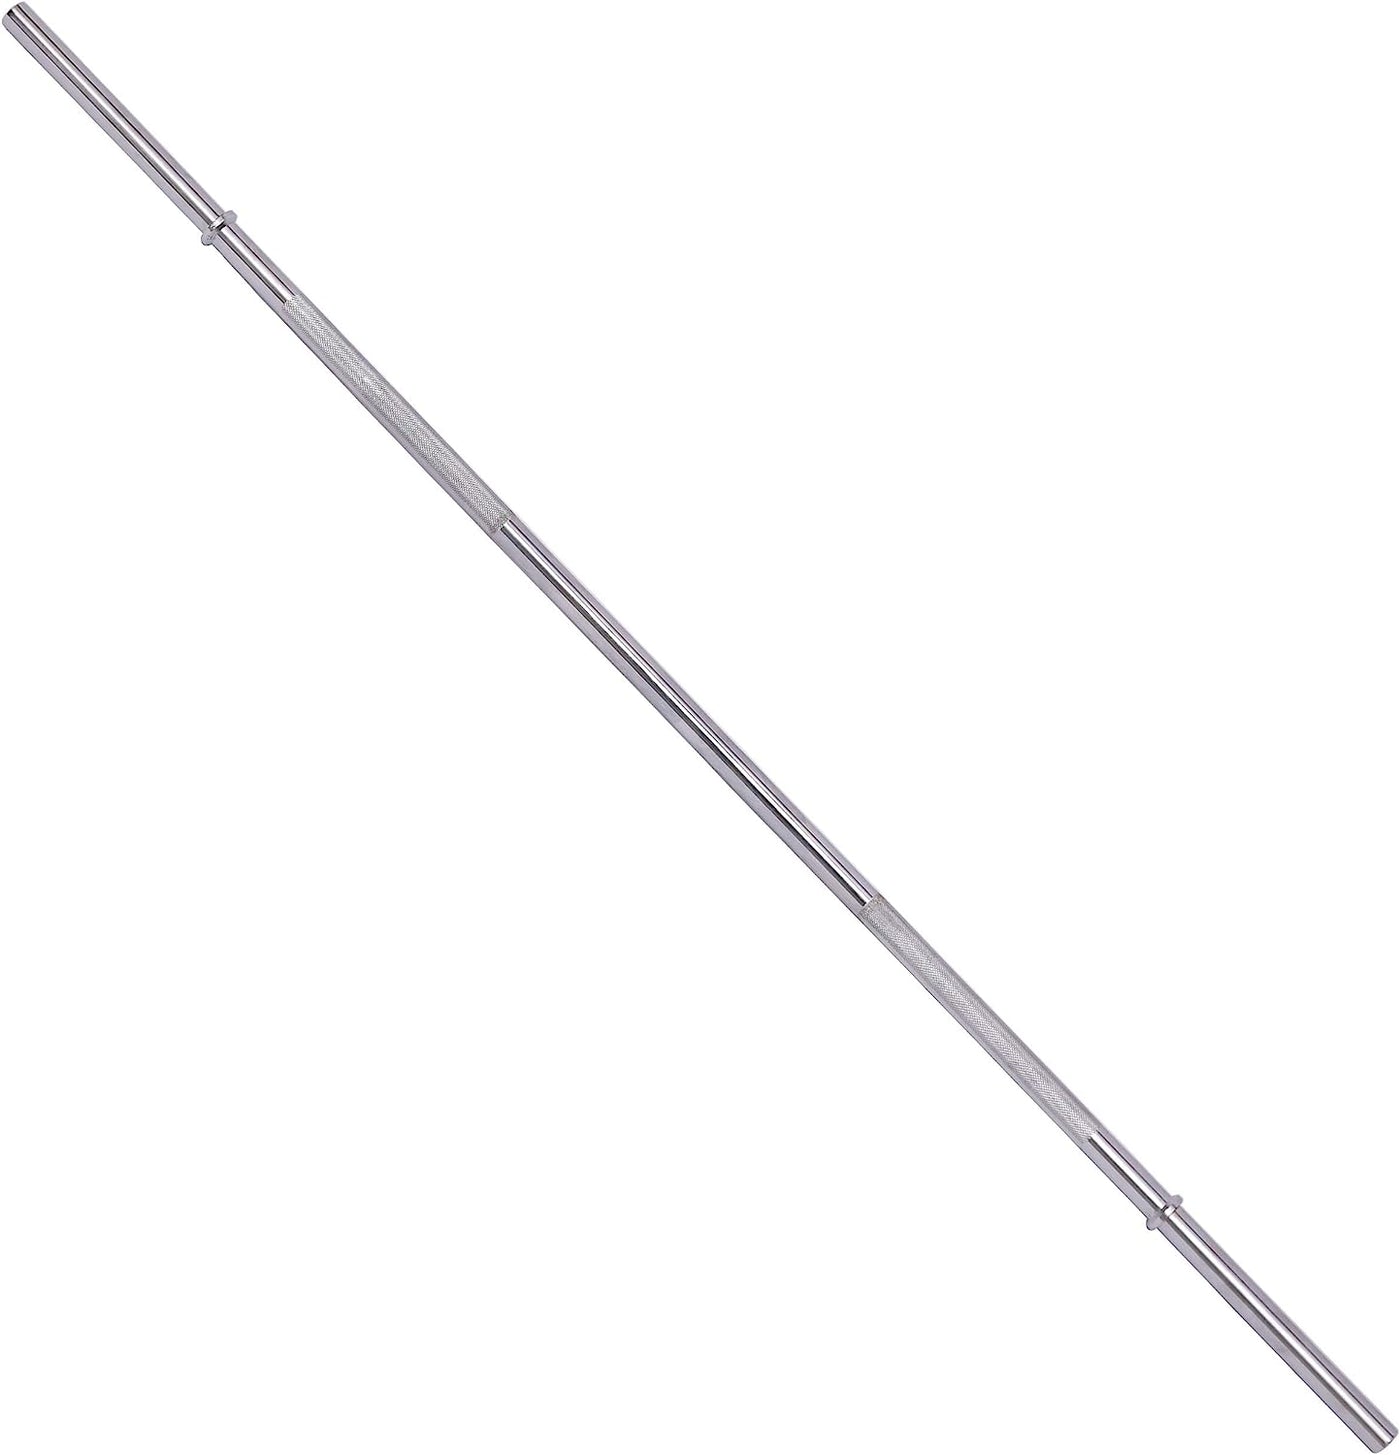 Sporzon! Olympic Barbell Standard Weightlifting Barbell, 1-inch, 5FT, Chrome - $25